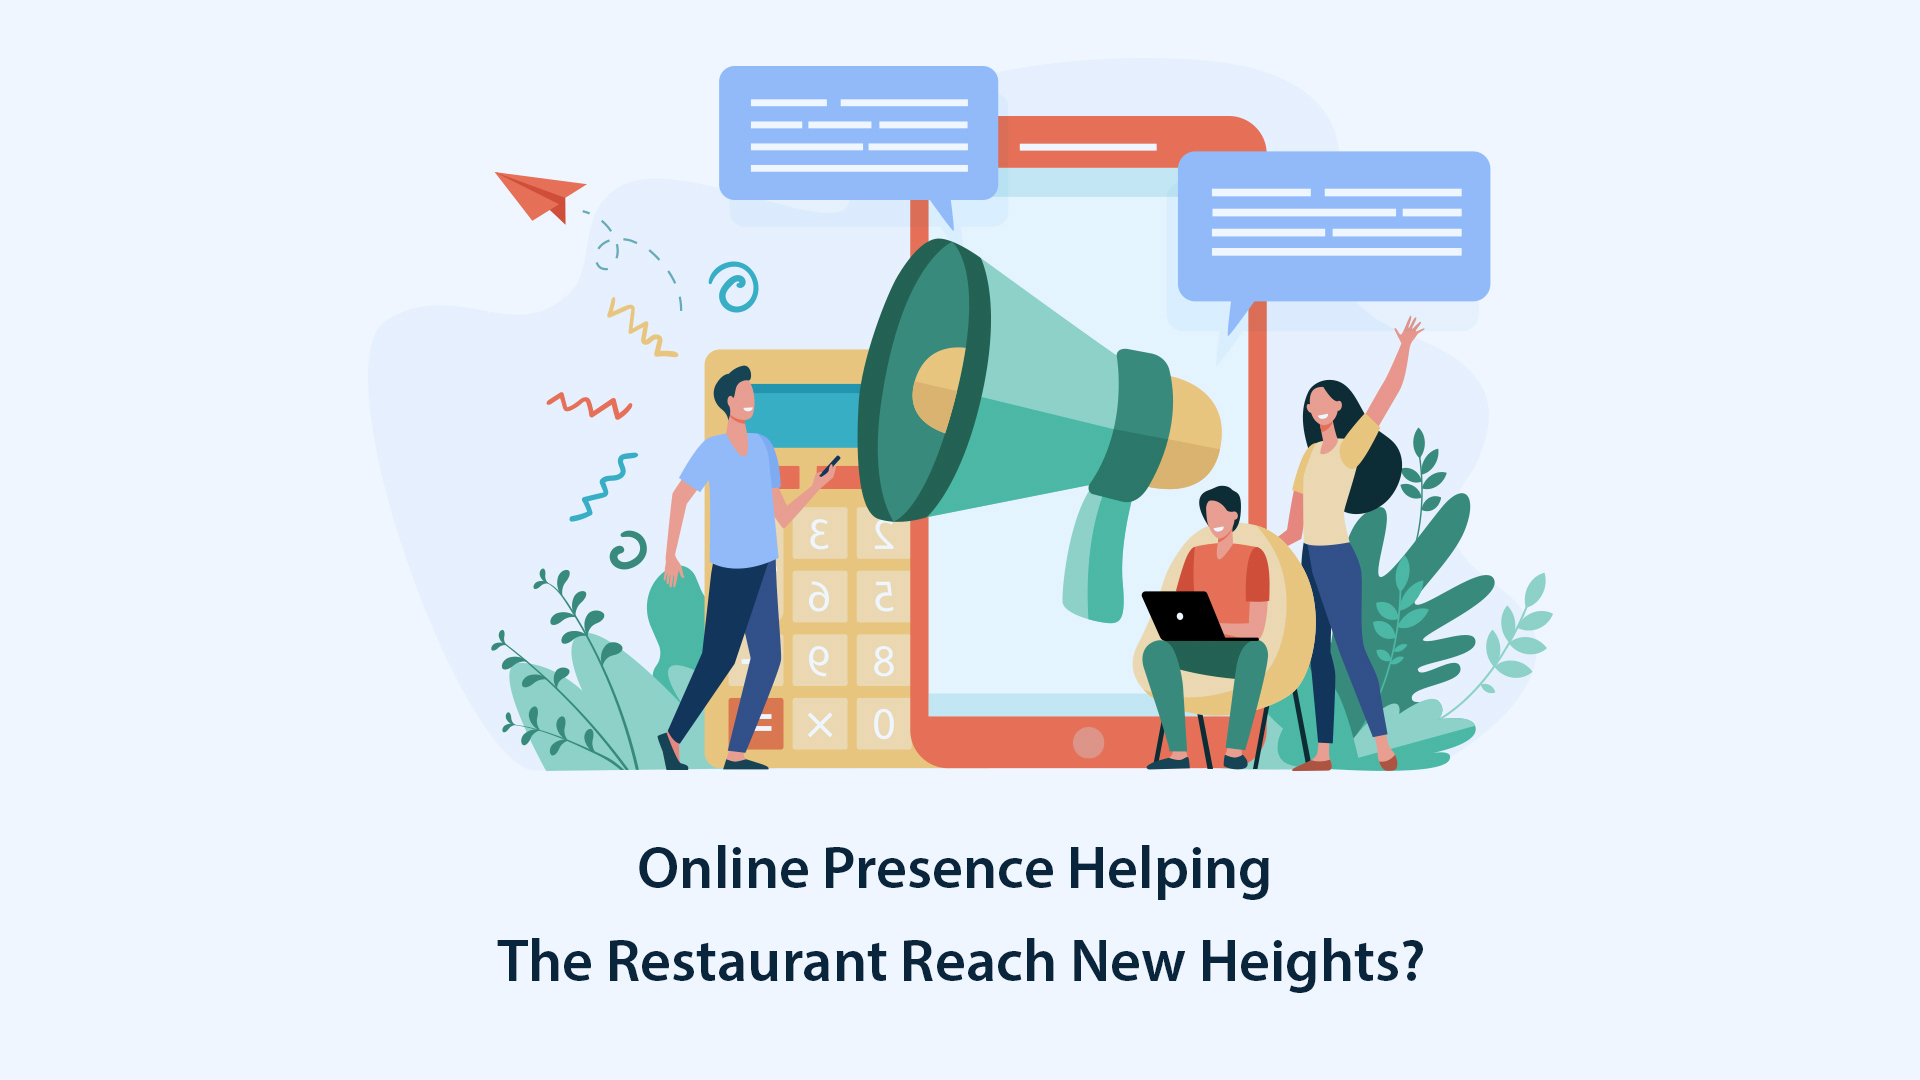 How Is Online Presence Helping The Restaurant Reach New Heights?